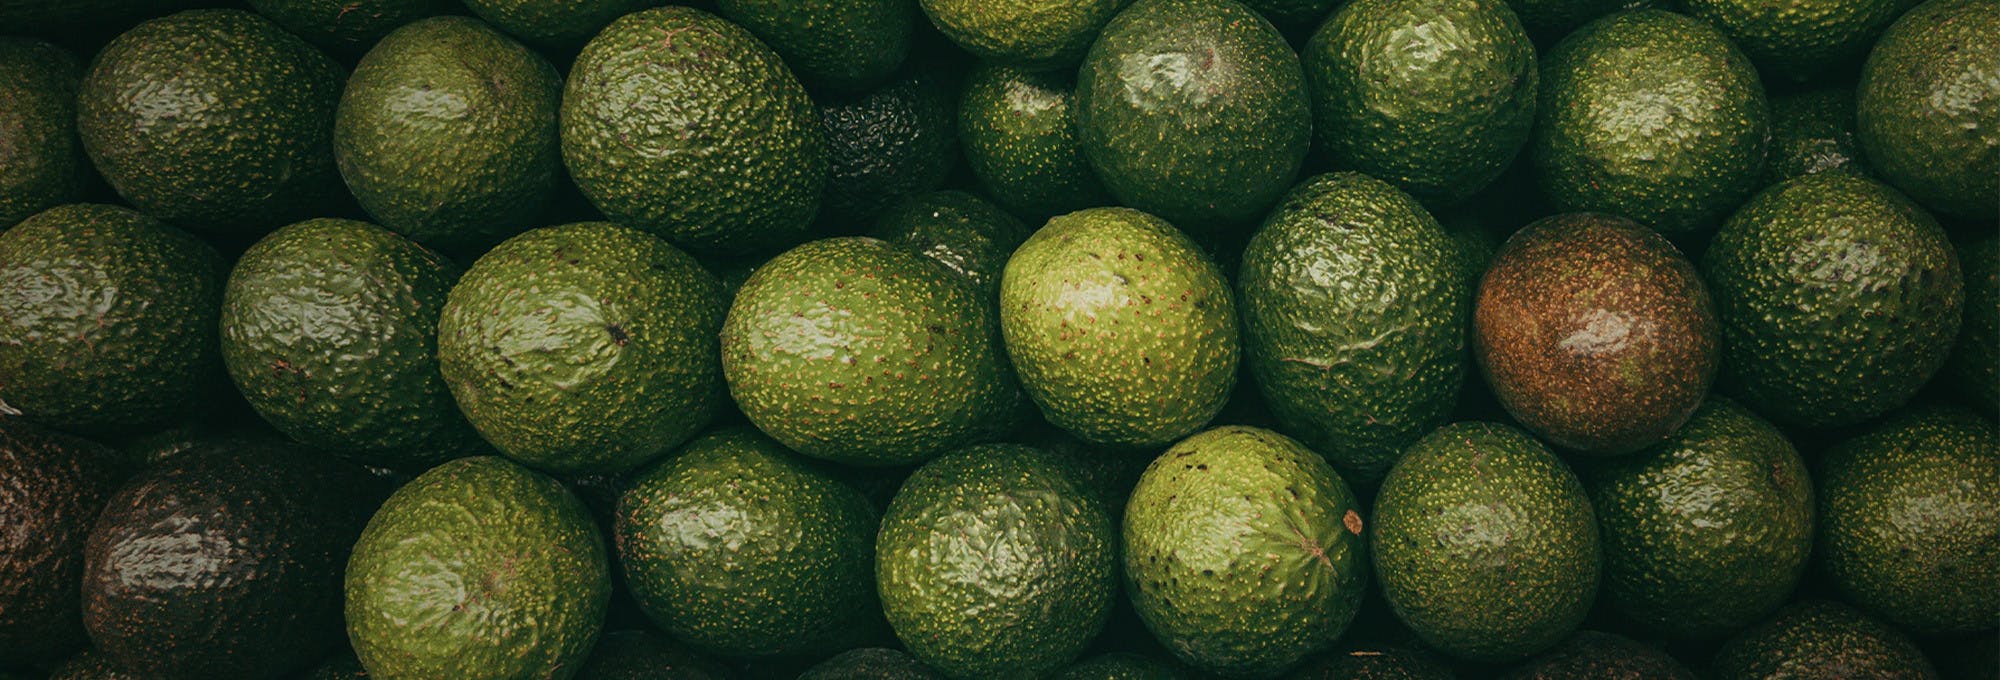 Closeup overhead view of several rows of avocados, which are a demanded product in a store